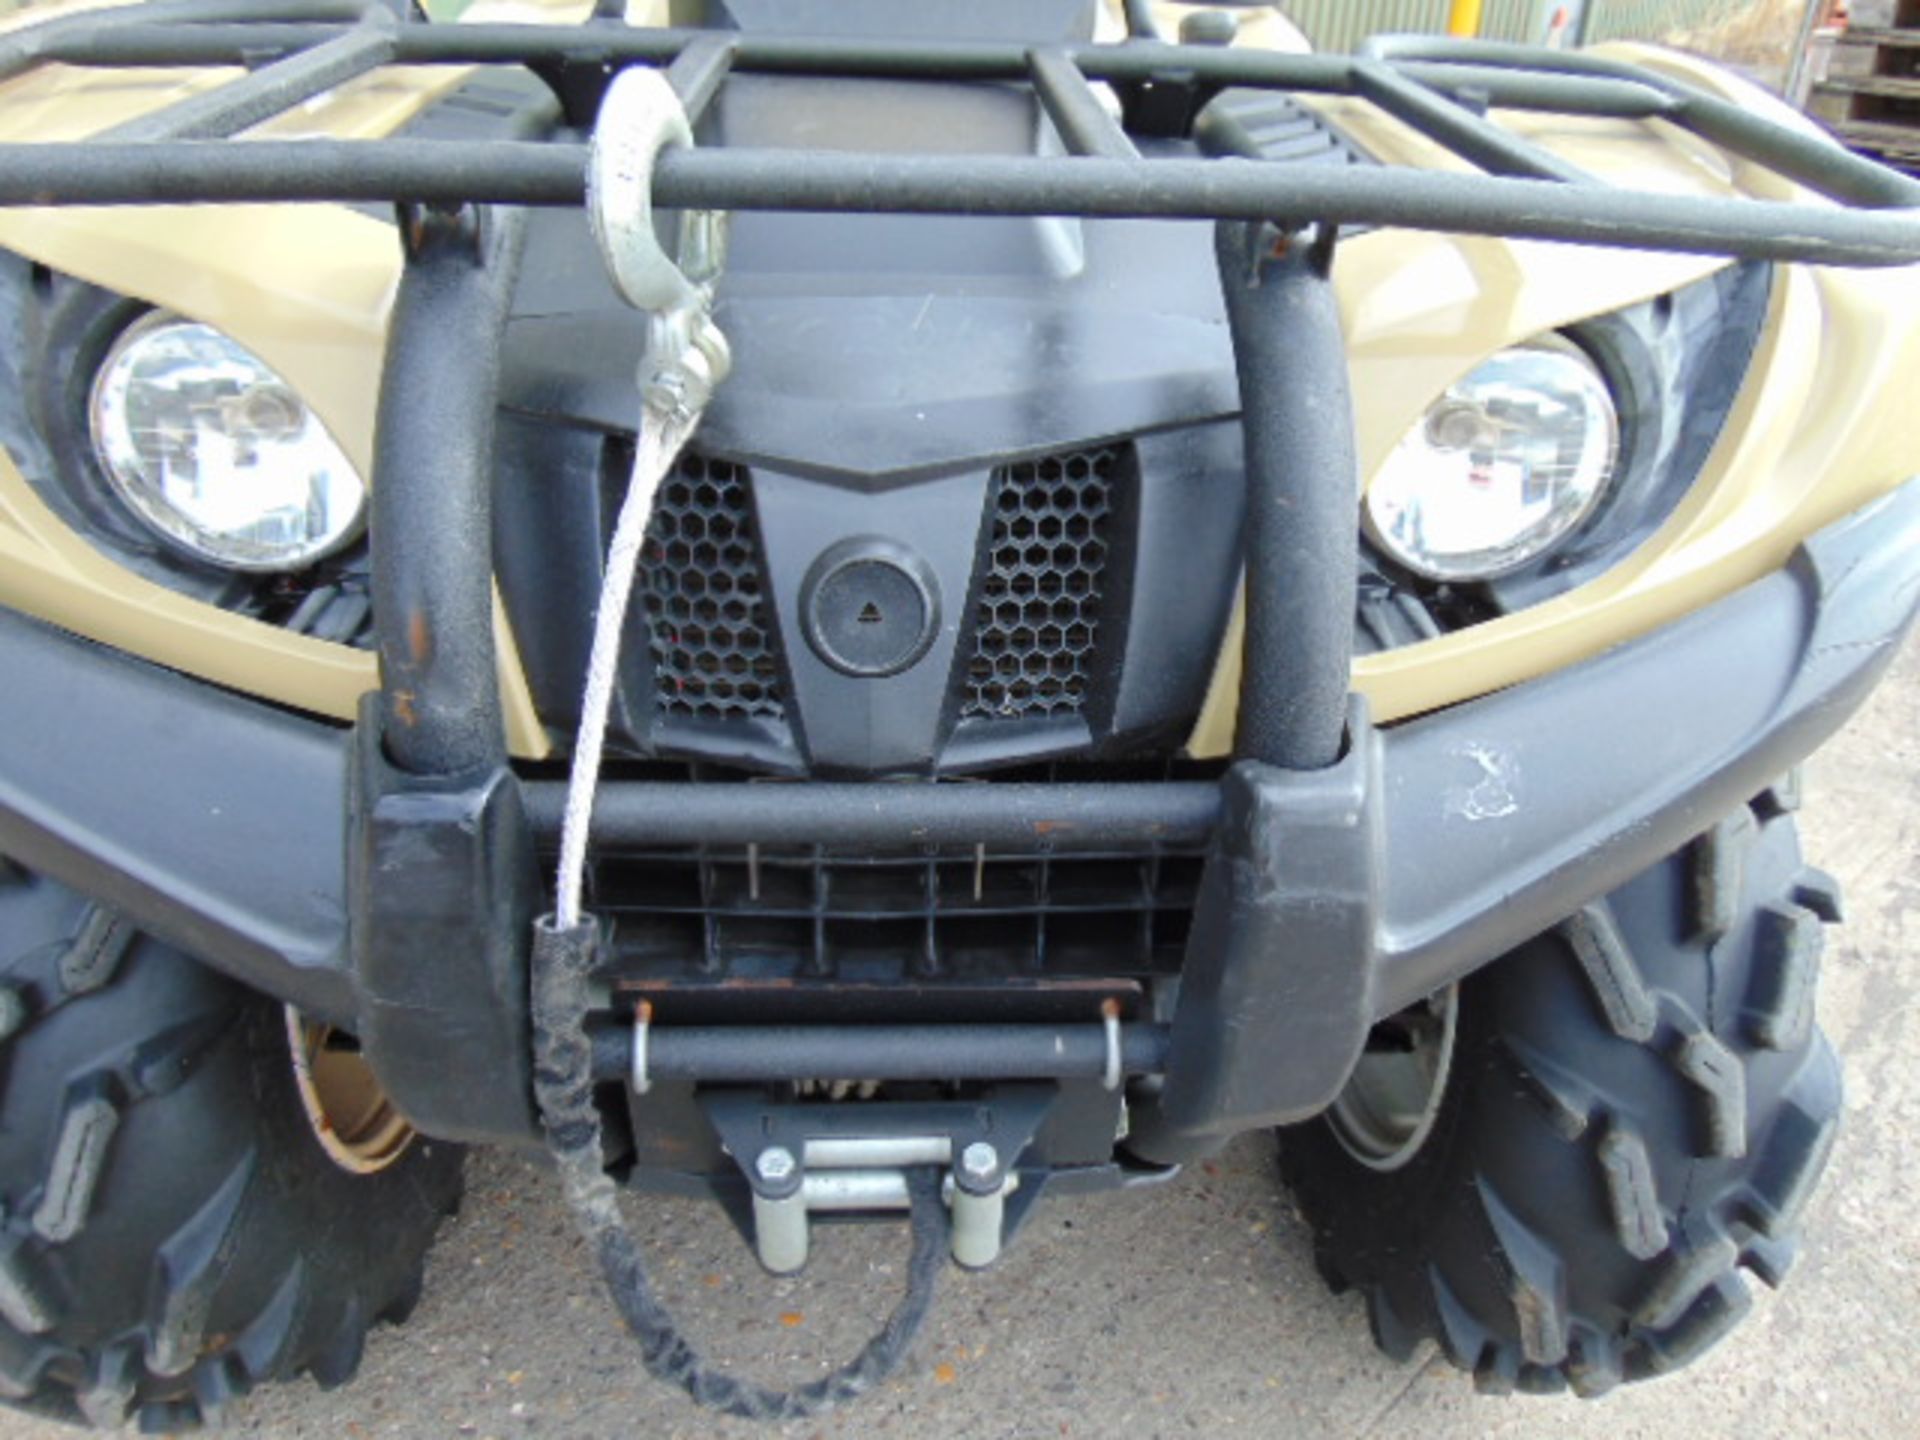 Yamaha Grizzly 450 4 x 4 ATV Quad Bike Complete with Winch - Image 10 of 23